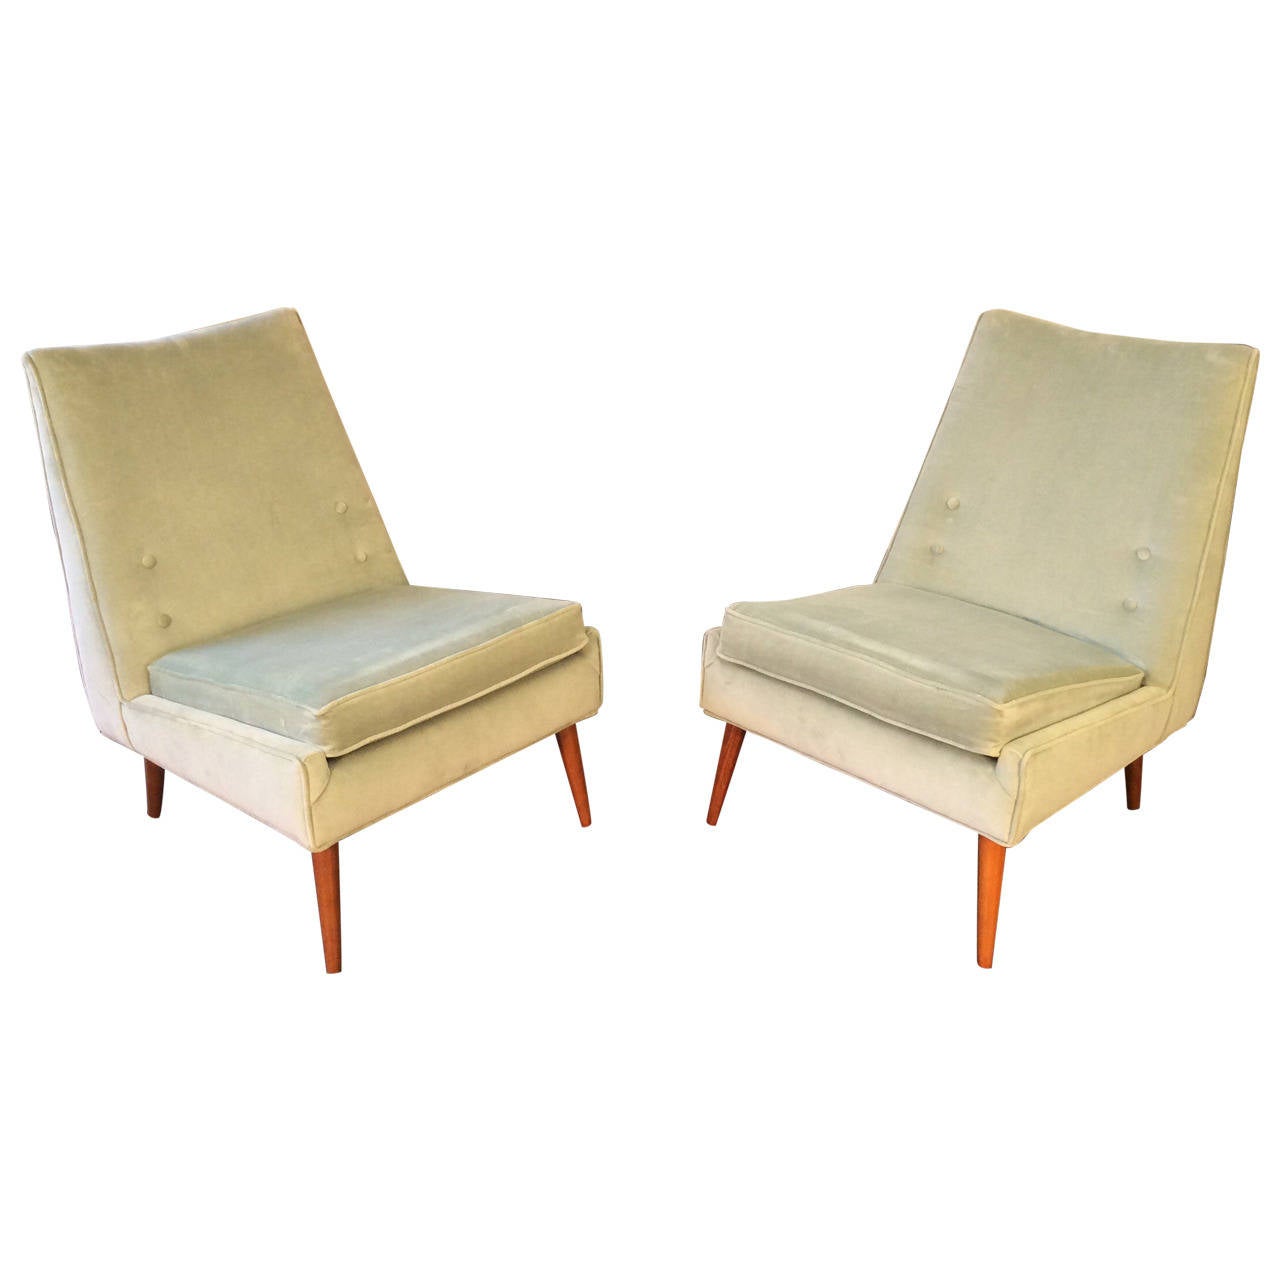 Impeccable early 1950s slipper lounge chairs in the style of Paul McCobb for Winchendon. The upholstery is a beautiful sea foam velvet. Legs are a light walnut. 

We provide weekly complimentary delivery to NYC and surrounding areas.